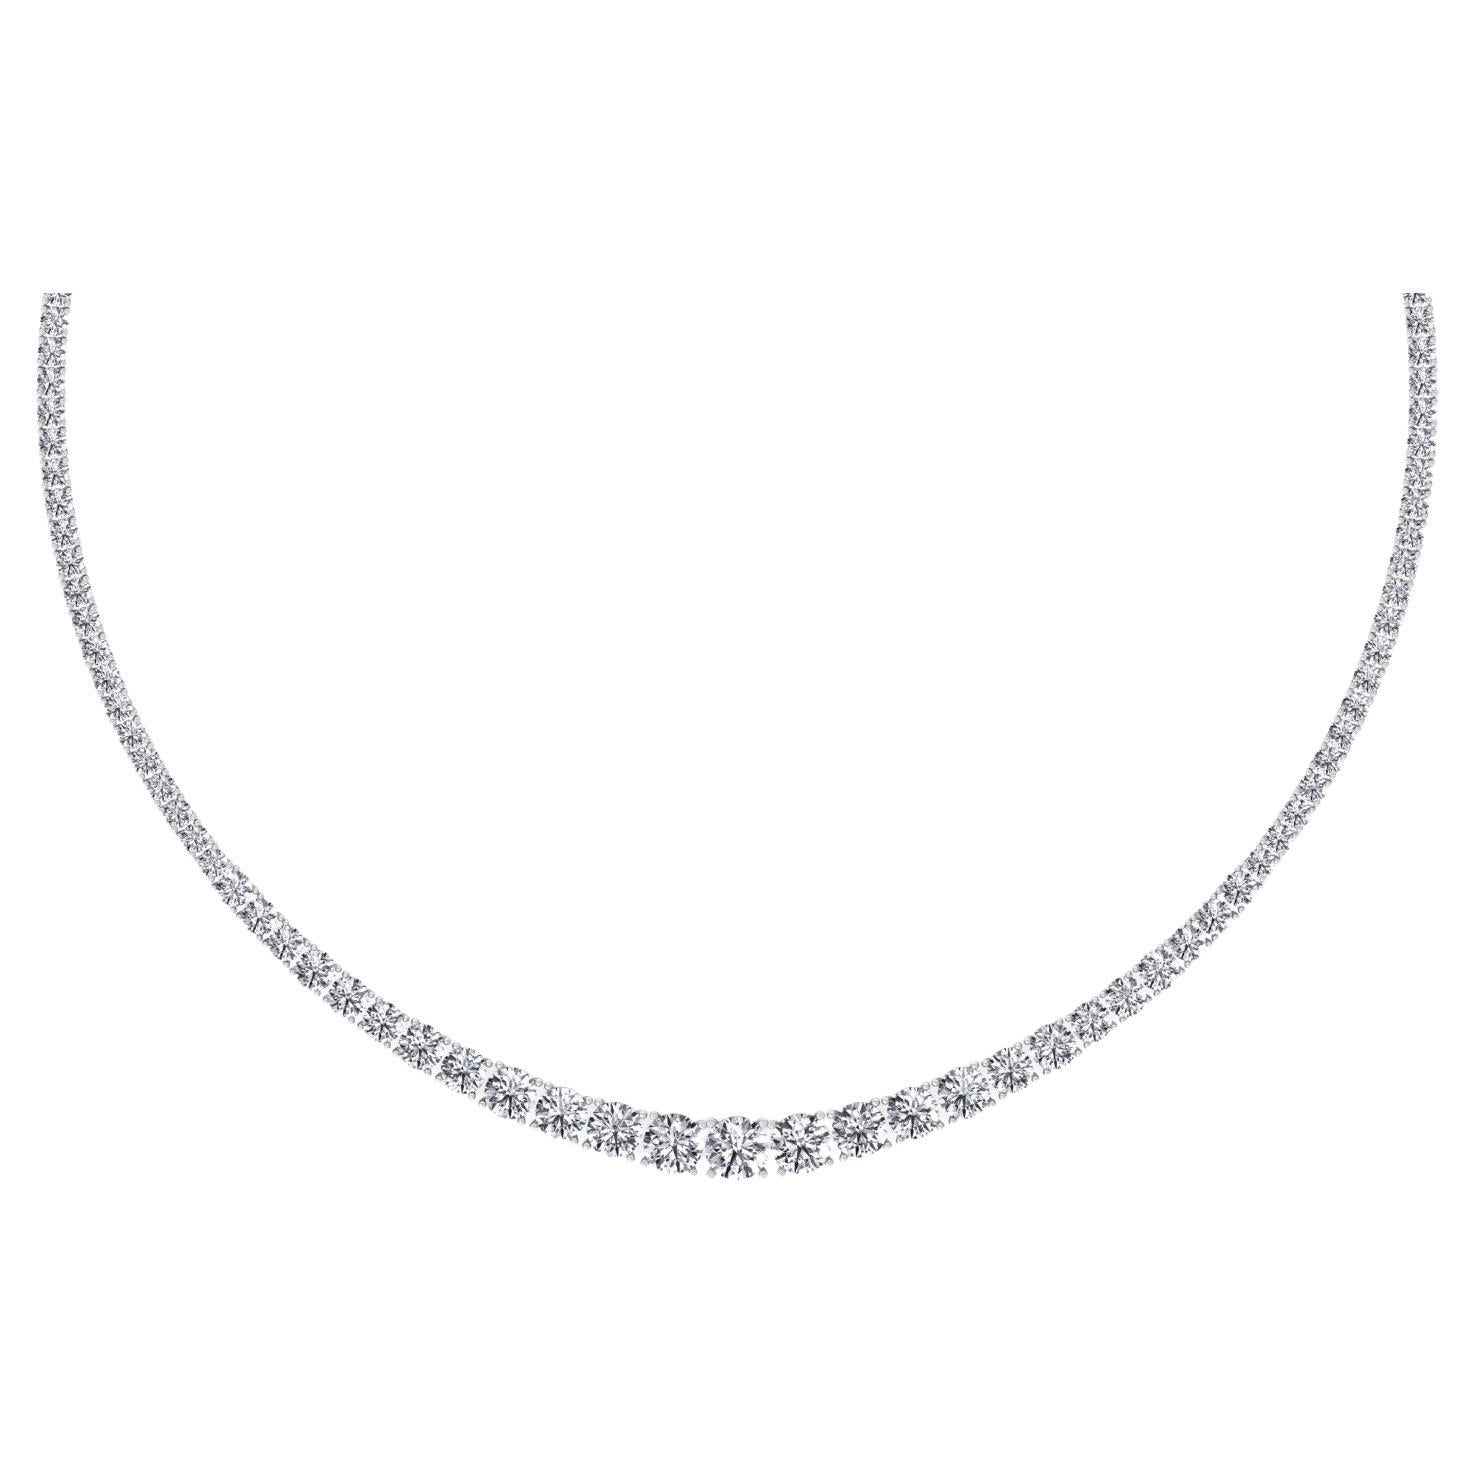 6.2 Carat Graduated Diamond Tennis Necklace in 14k White Gold by Gem Jewelers Co